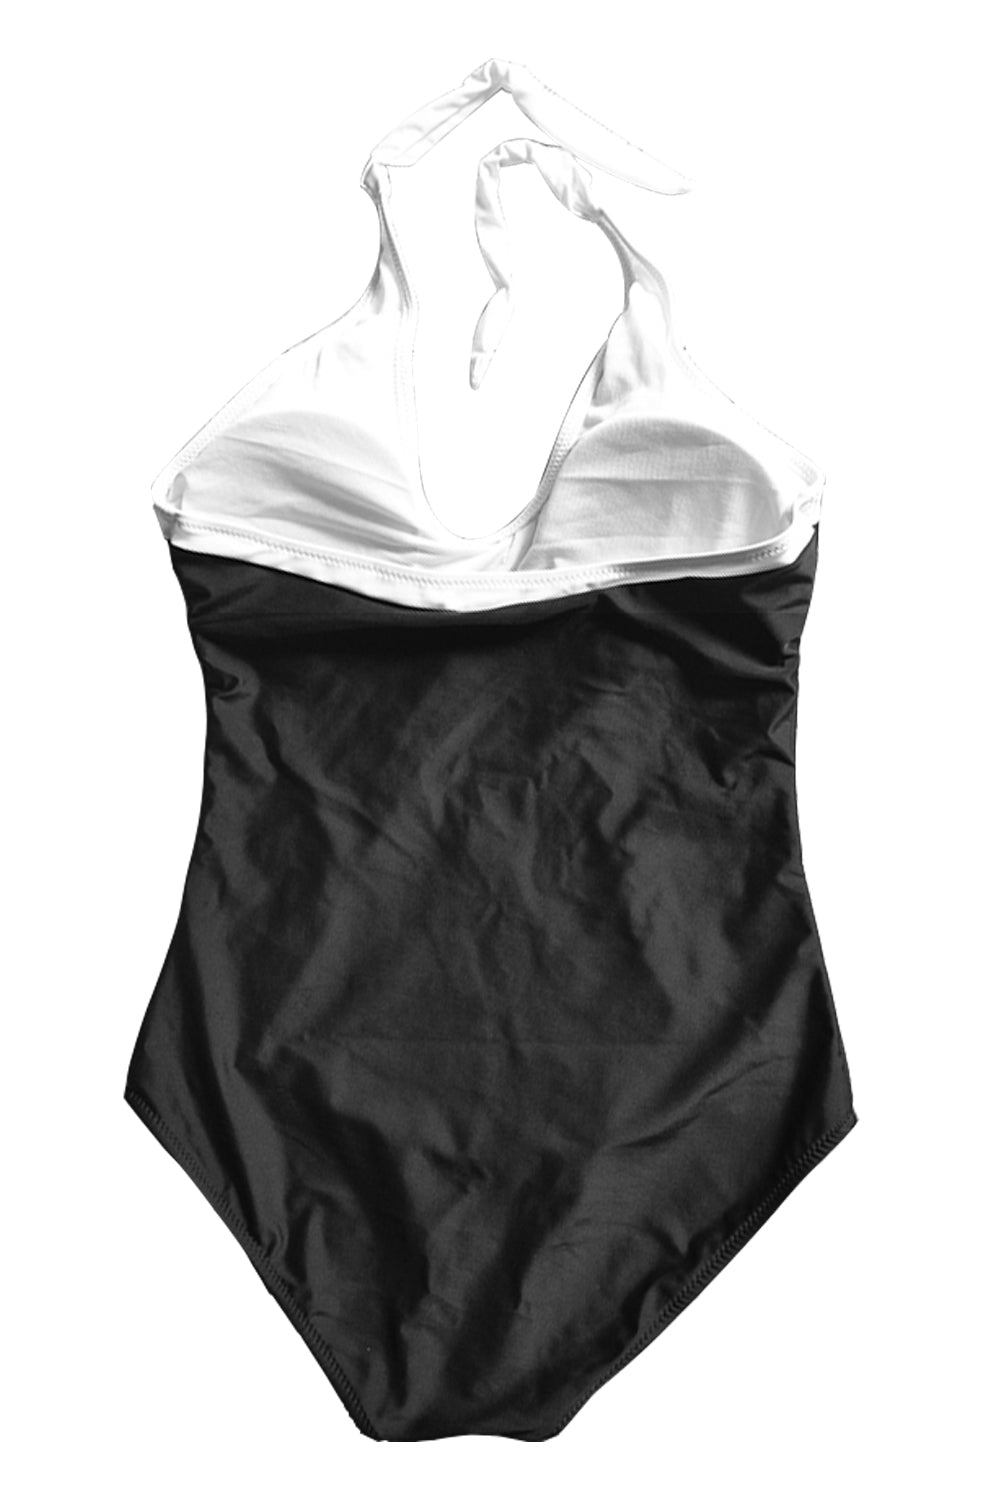 Iyasson Black And White Contrast Color One-piece Swimsuit